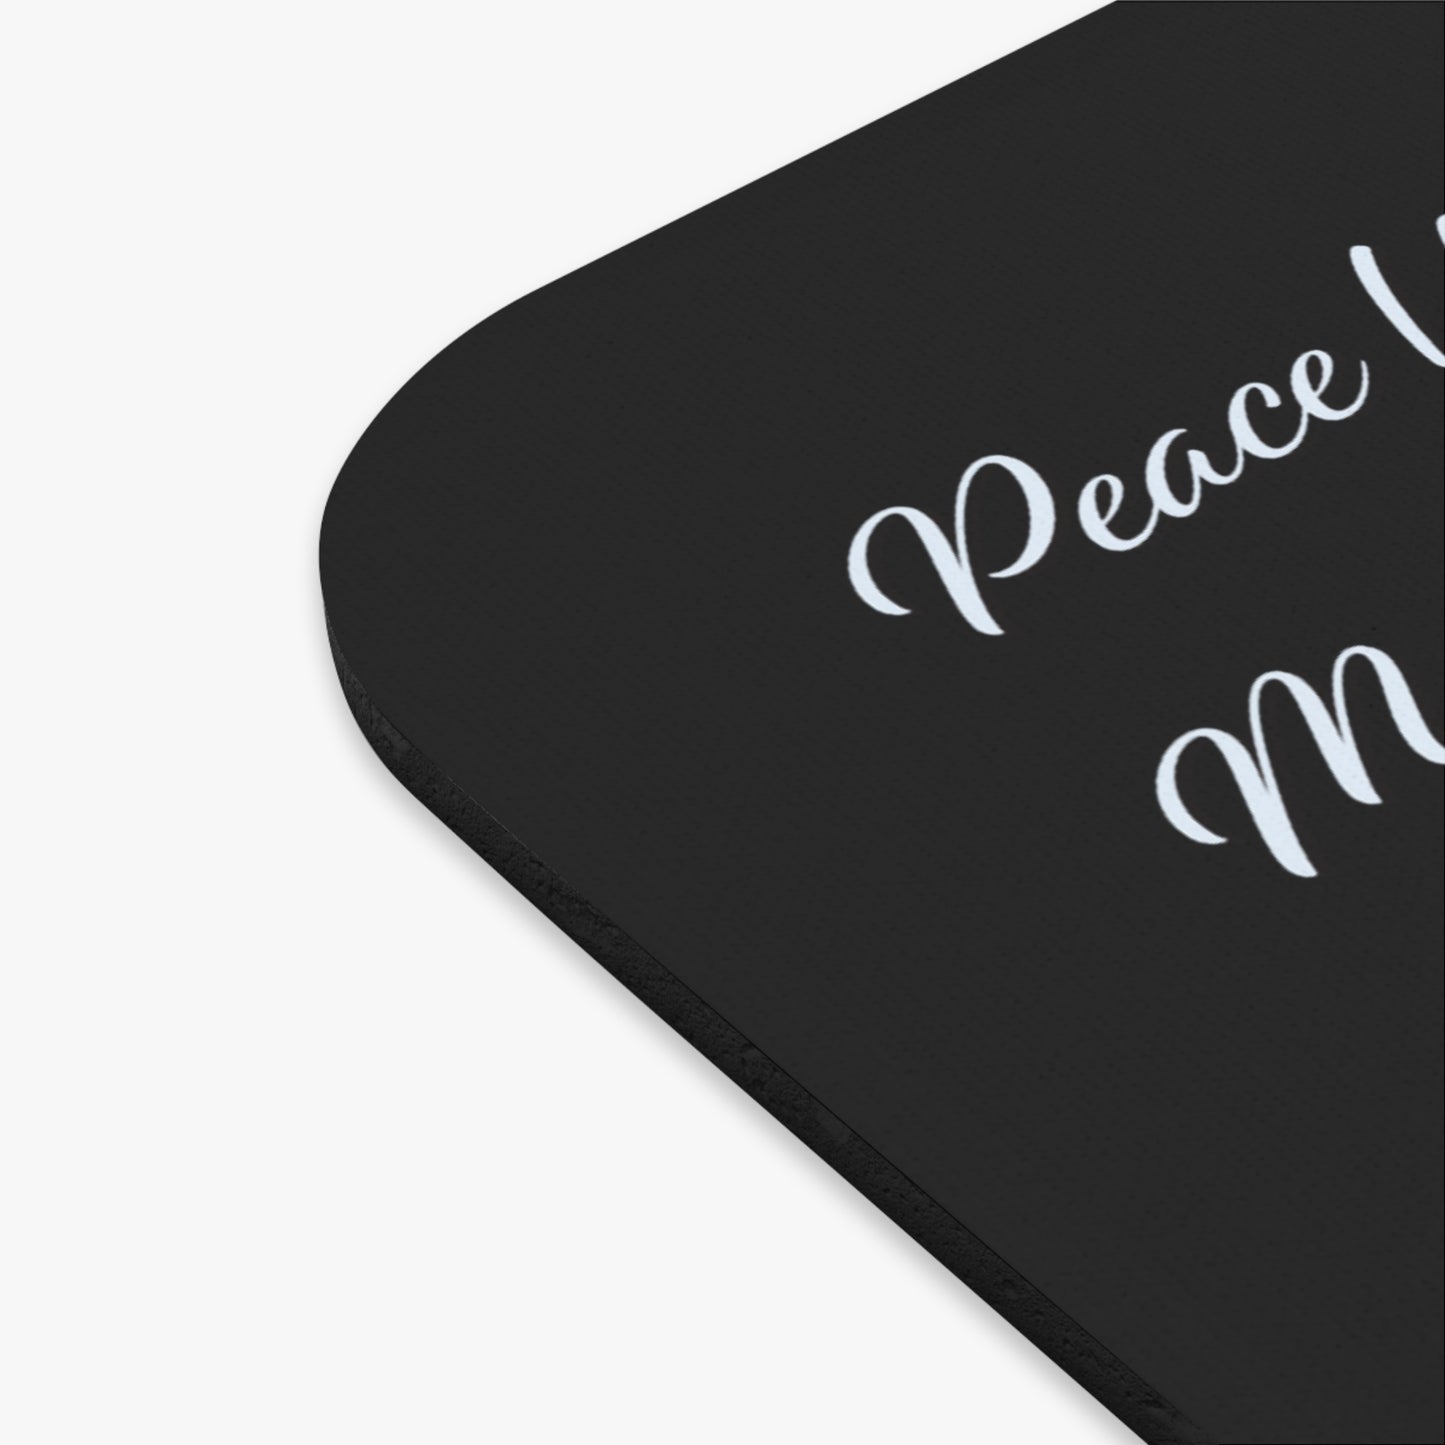 Mouse Pad (Rectangle) - Do Not Let Your Hearts Be Troubled